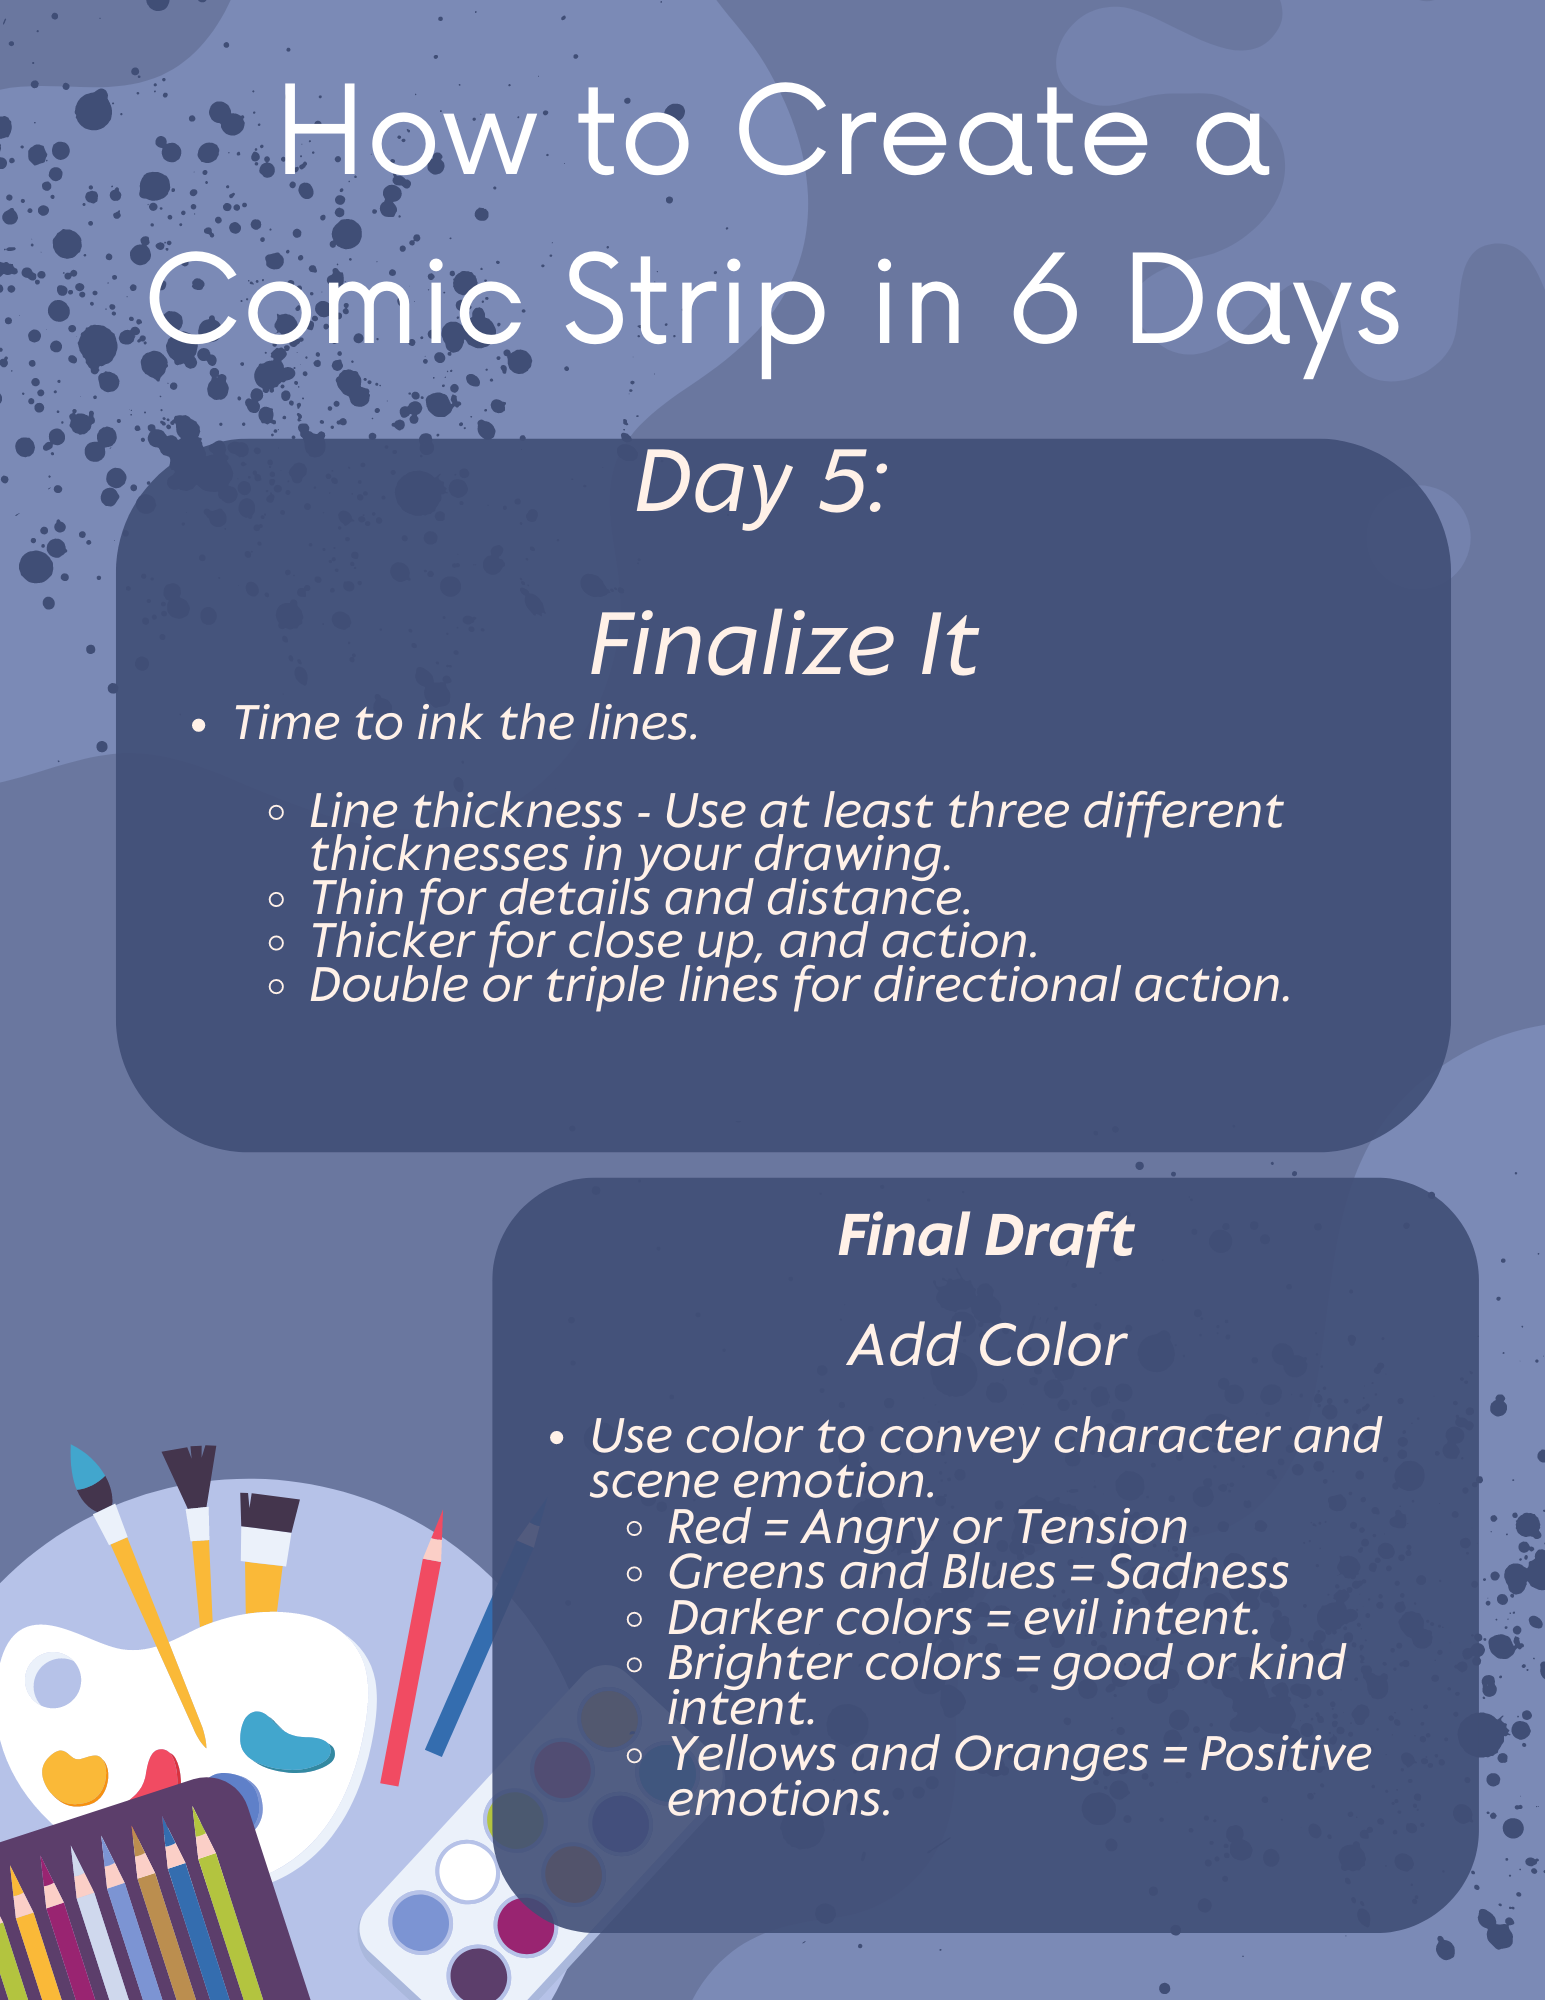 How to make a comic in 6 days – Day 5